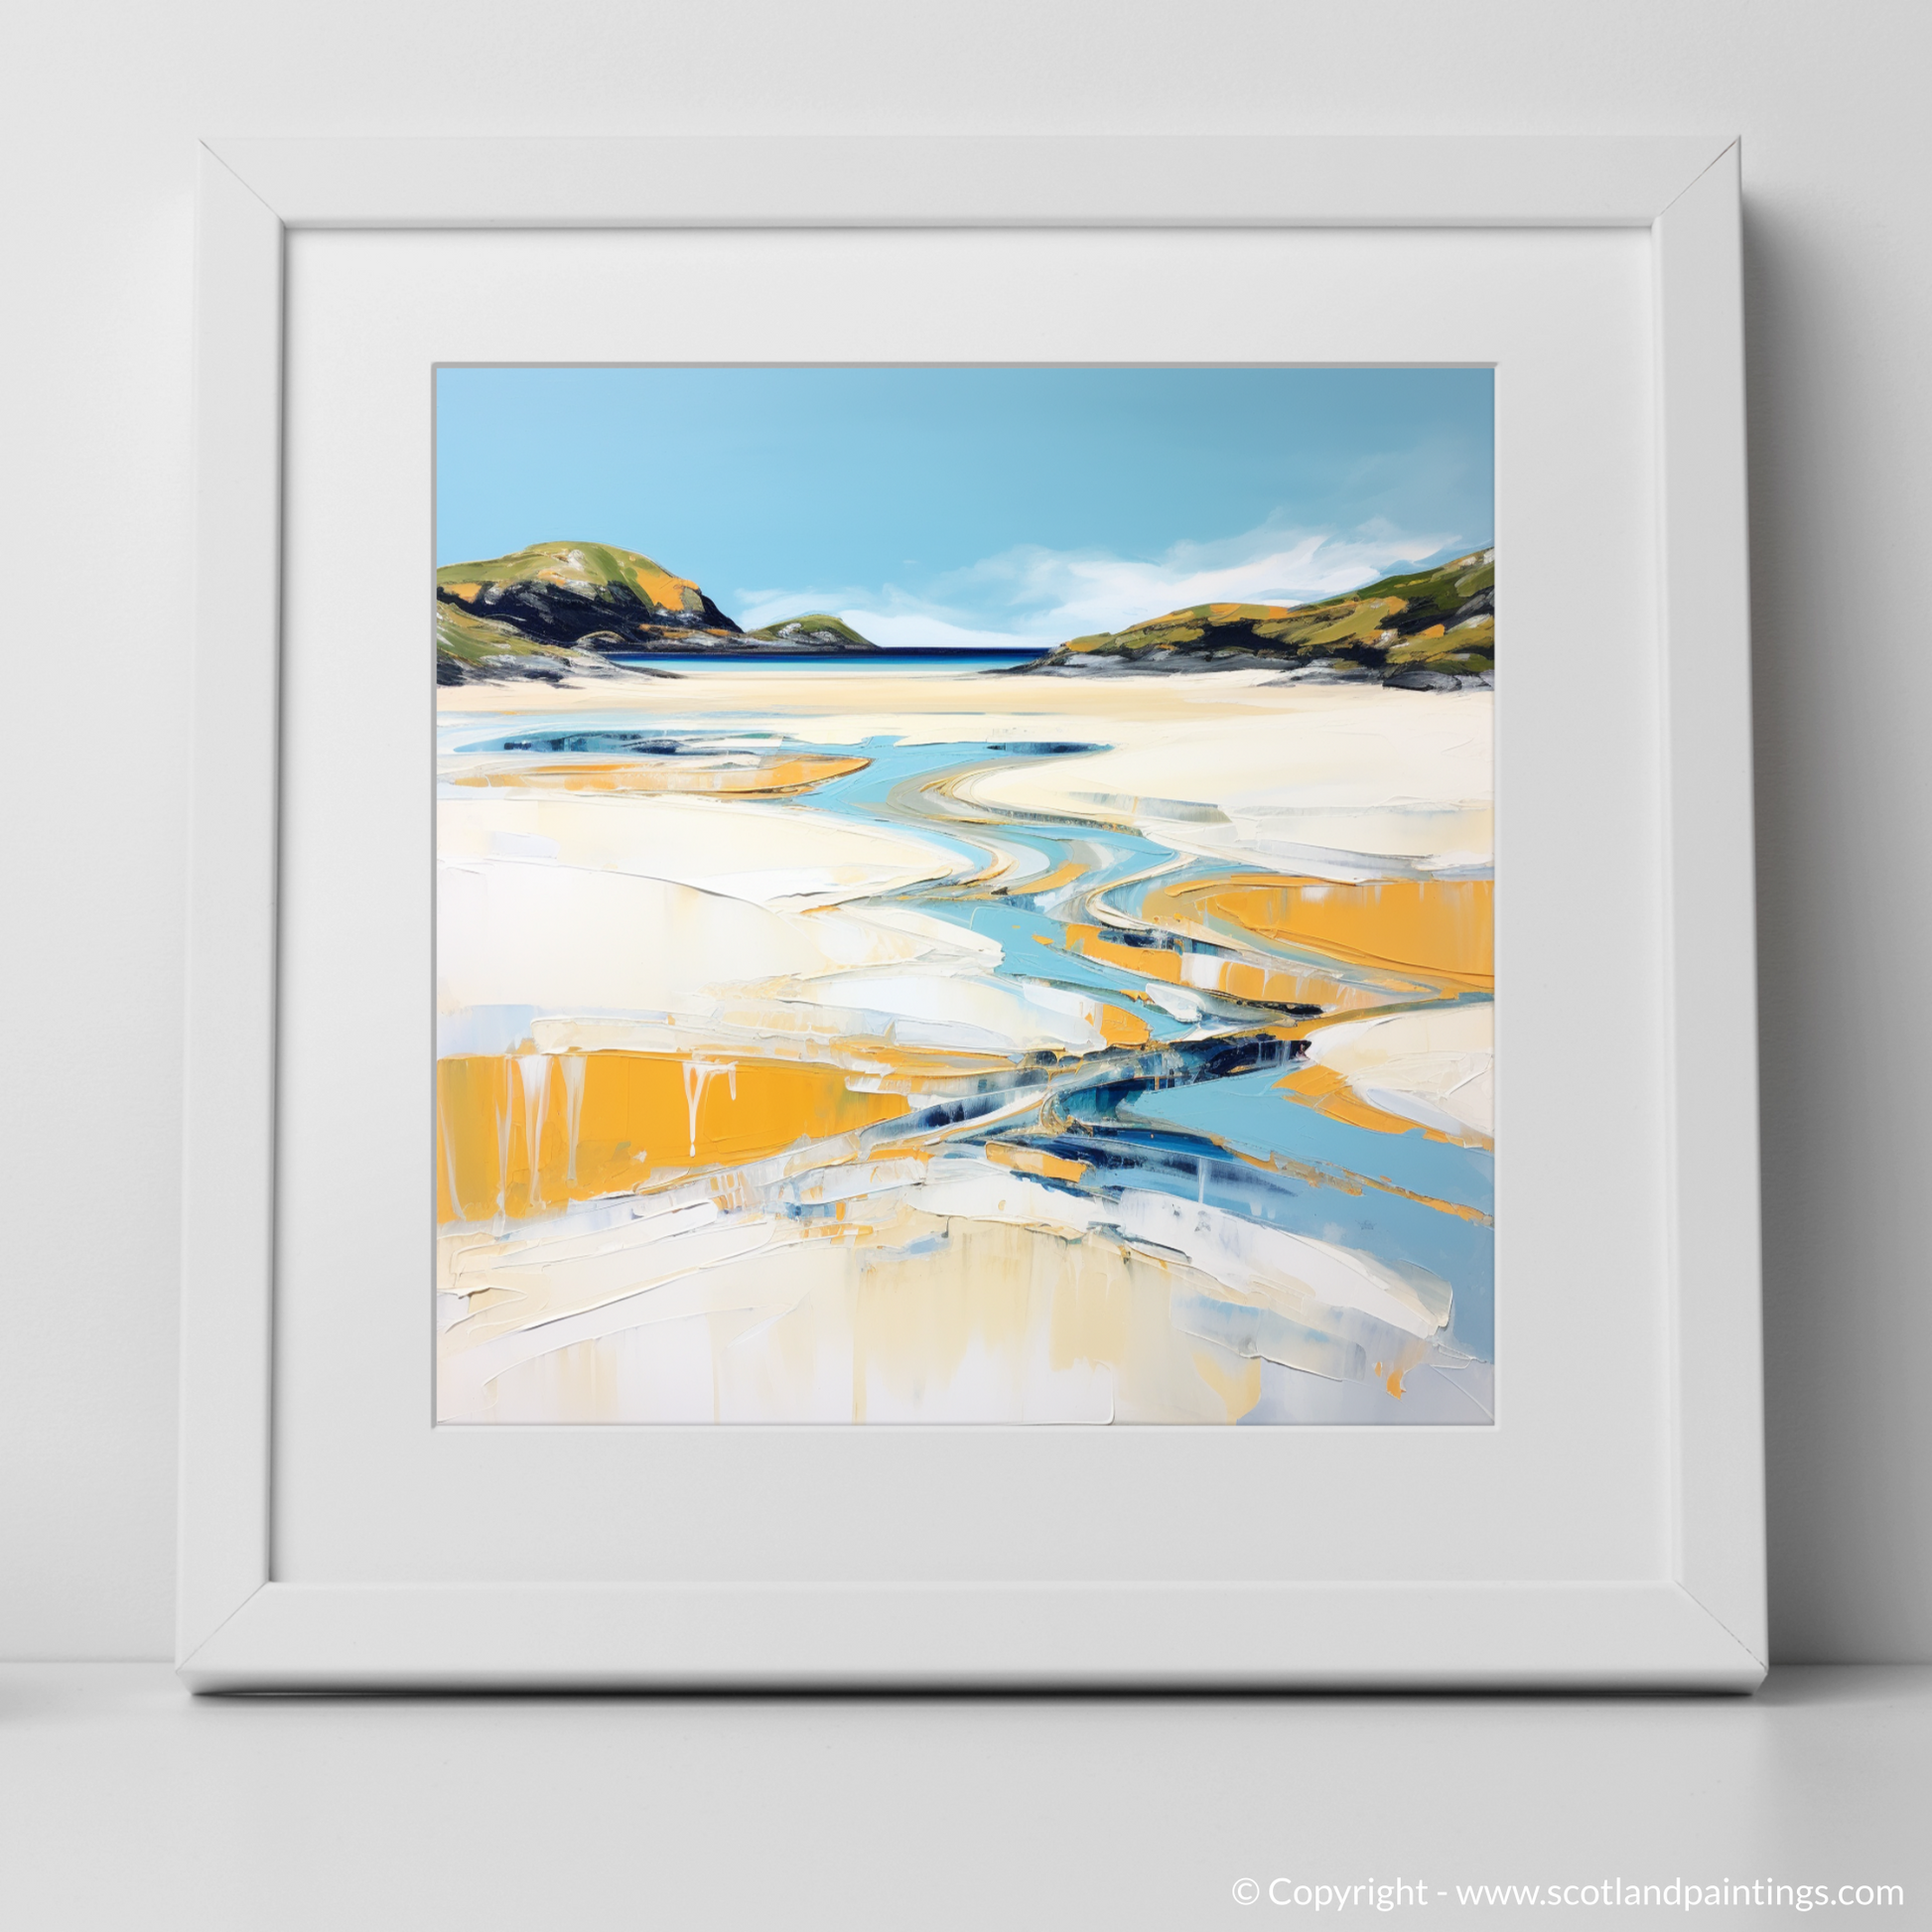 Art Print of Silver Sands of Morar in summer with a white frame